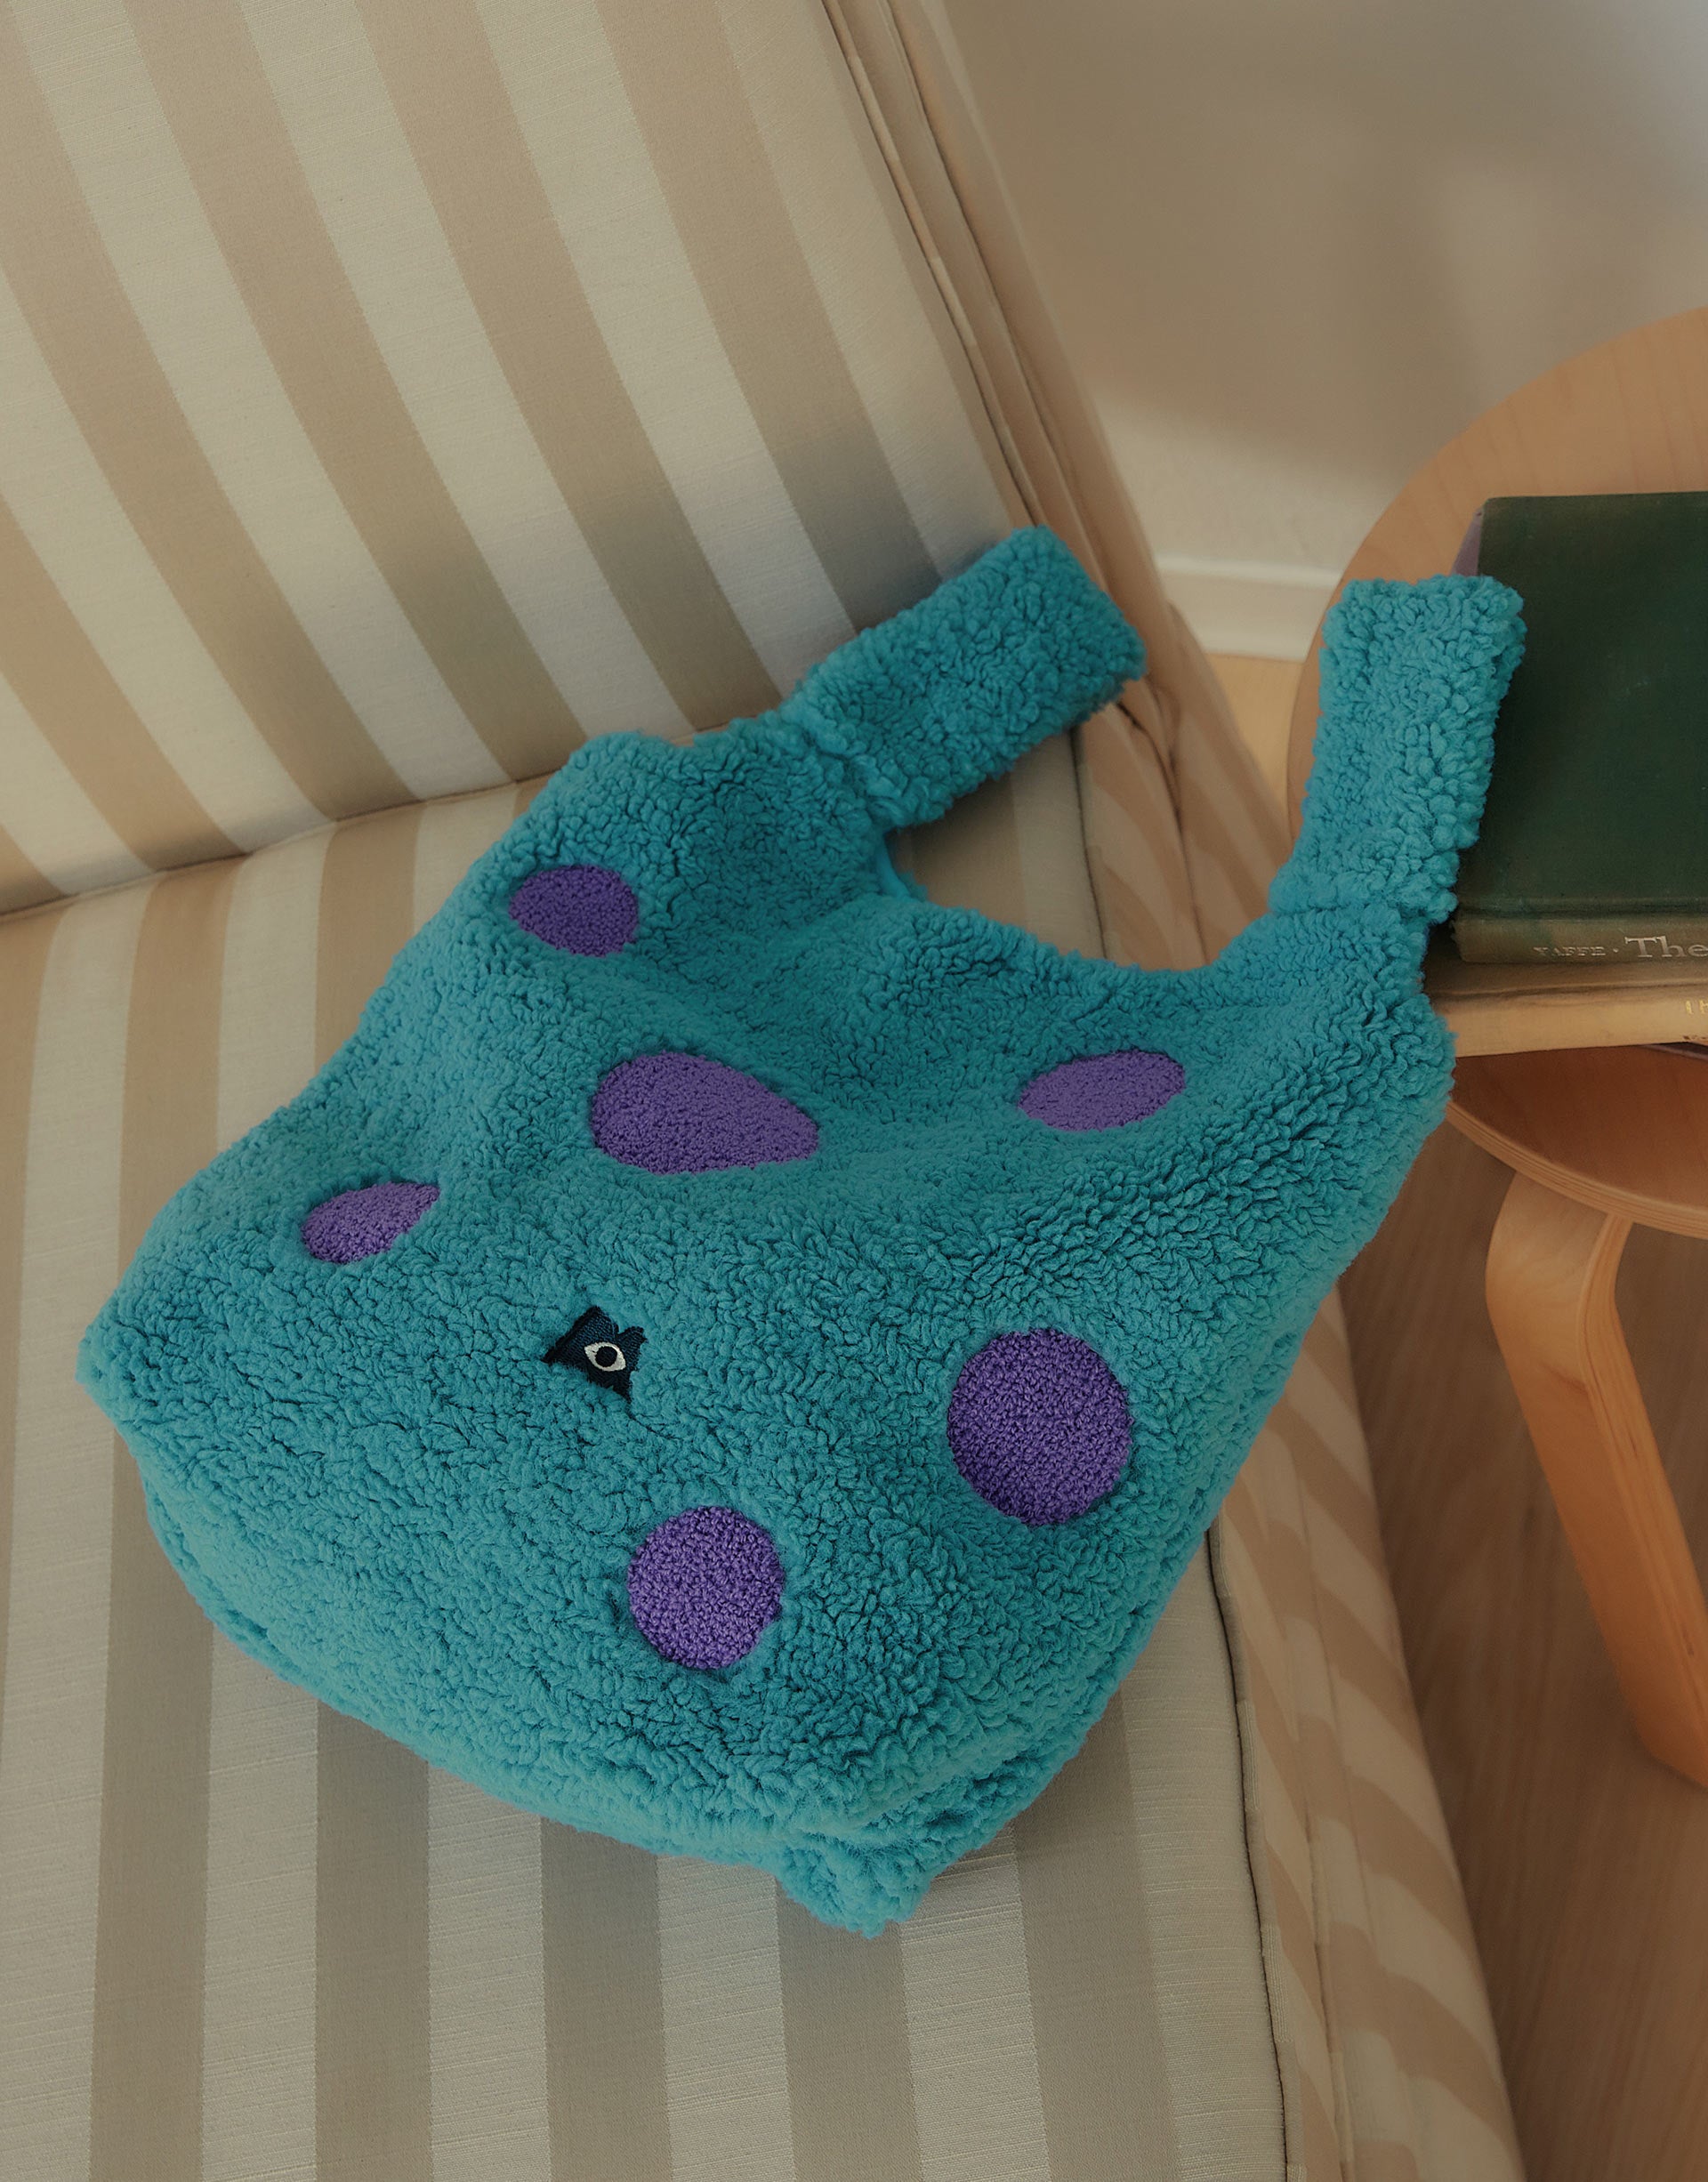 Monsters Inc. Sulley Teddy Tote